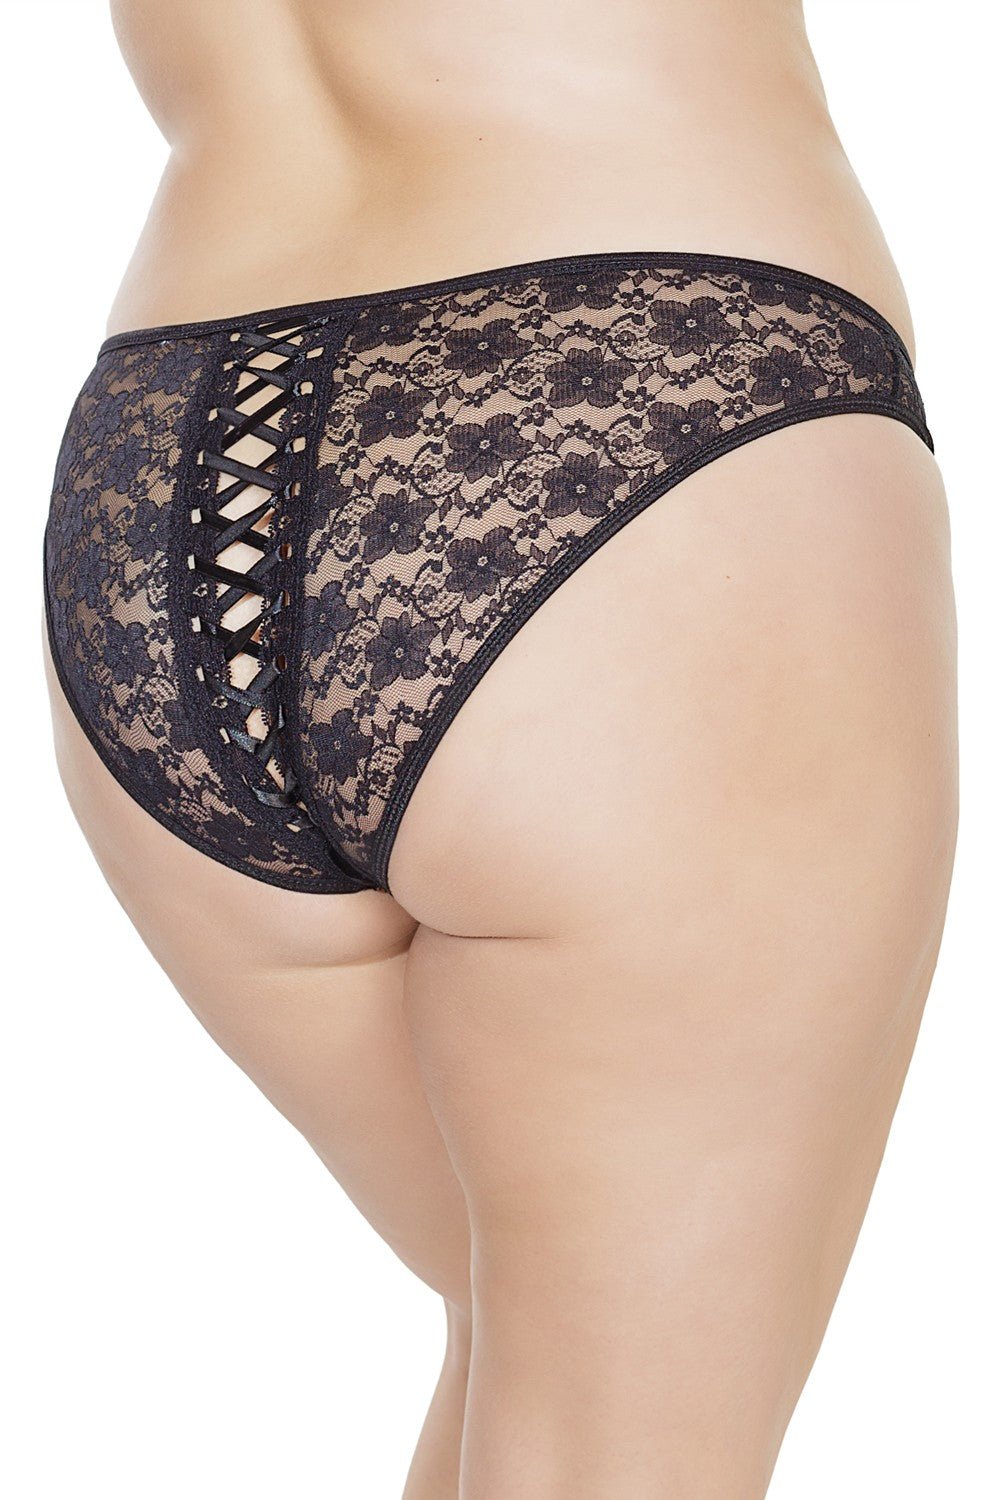 Crotchless Lace Panty with Front Tie - Model Express VancouverLingerie